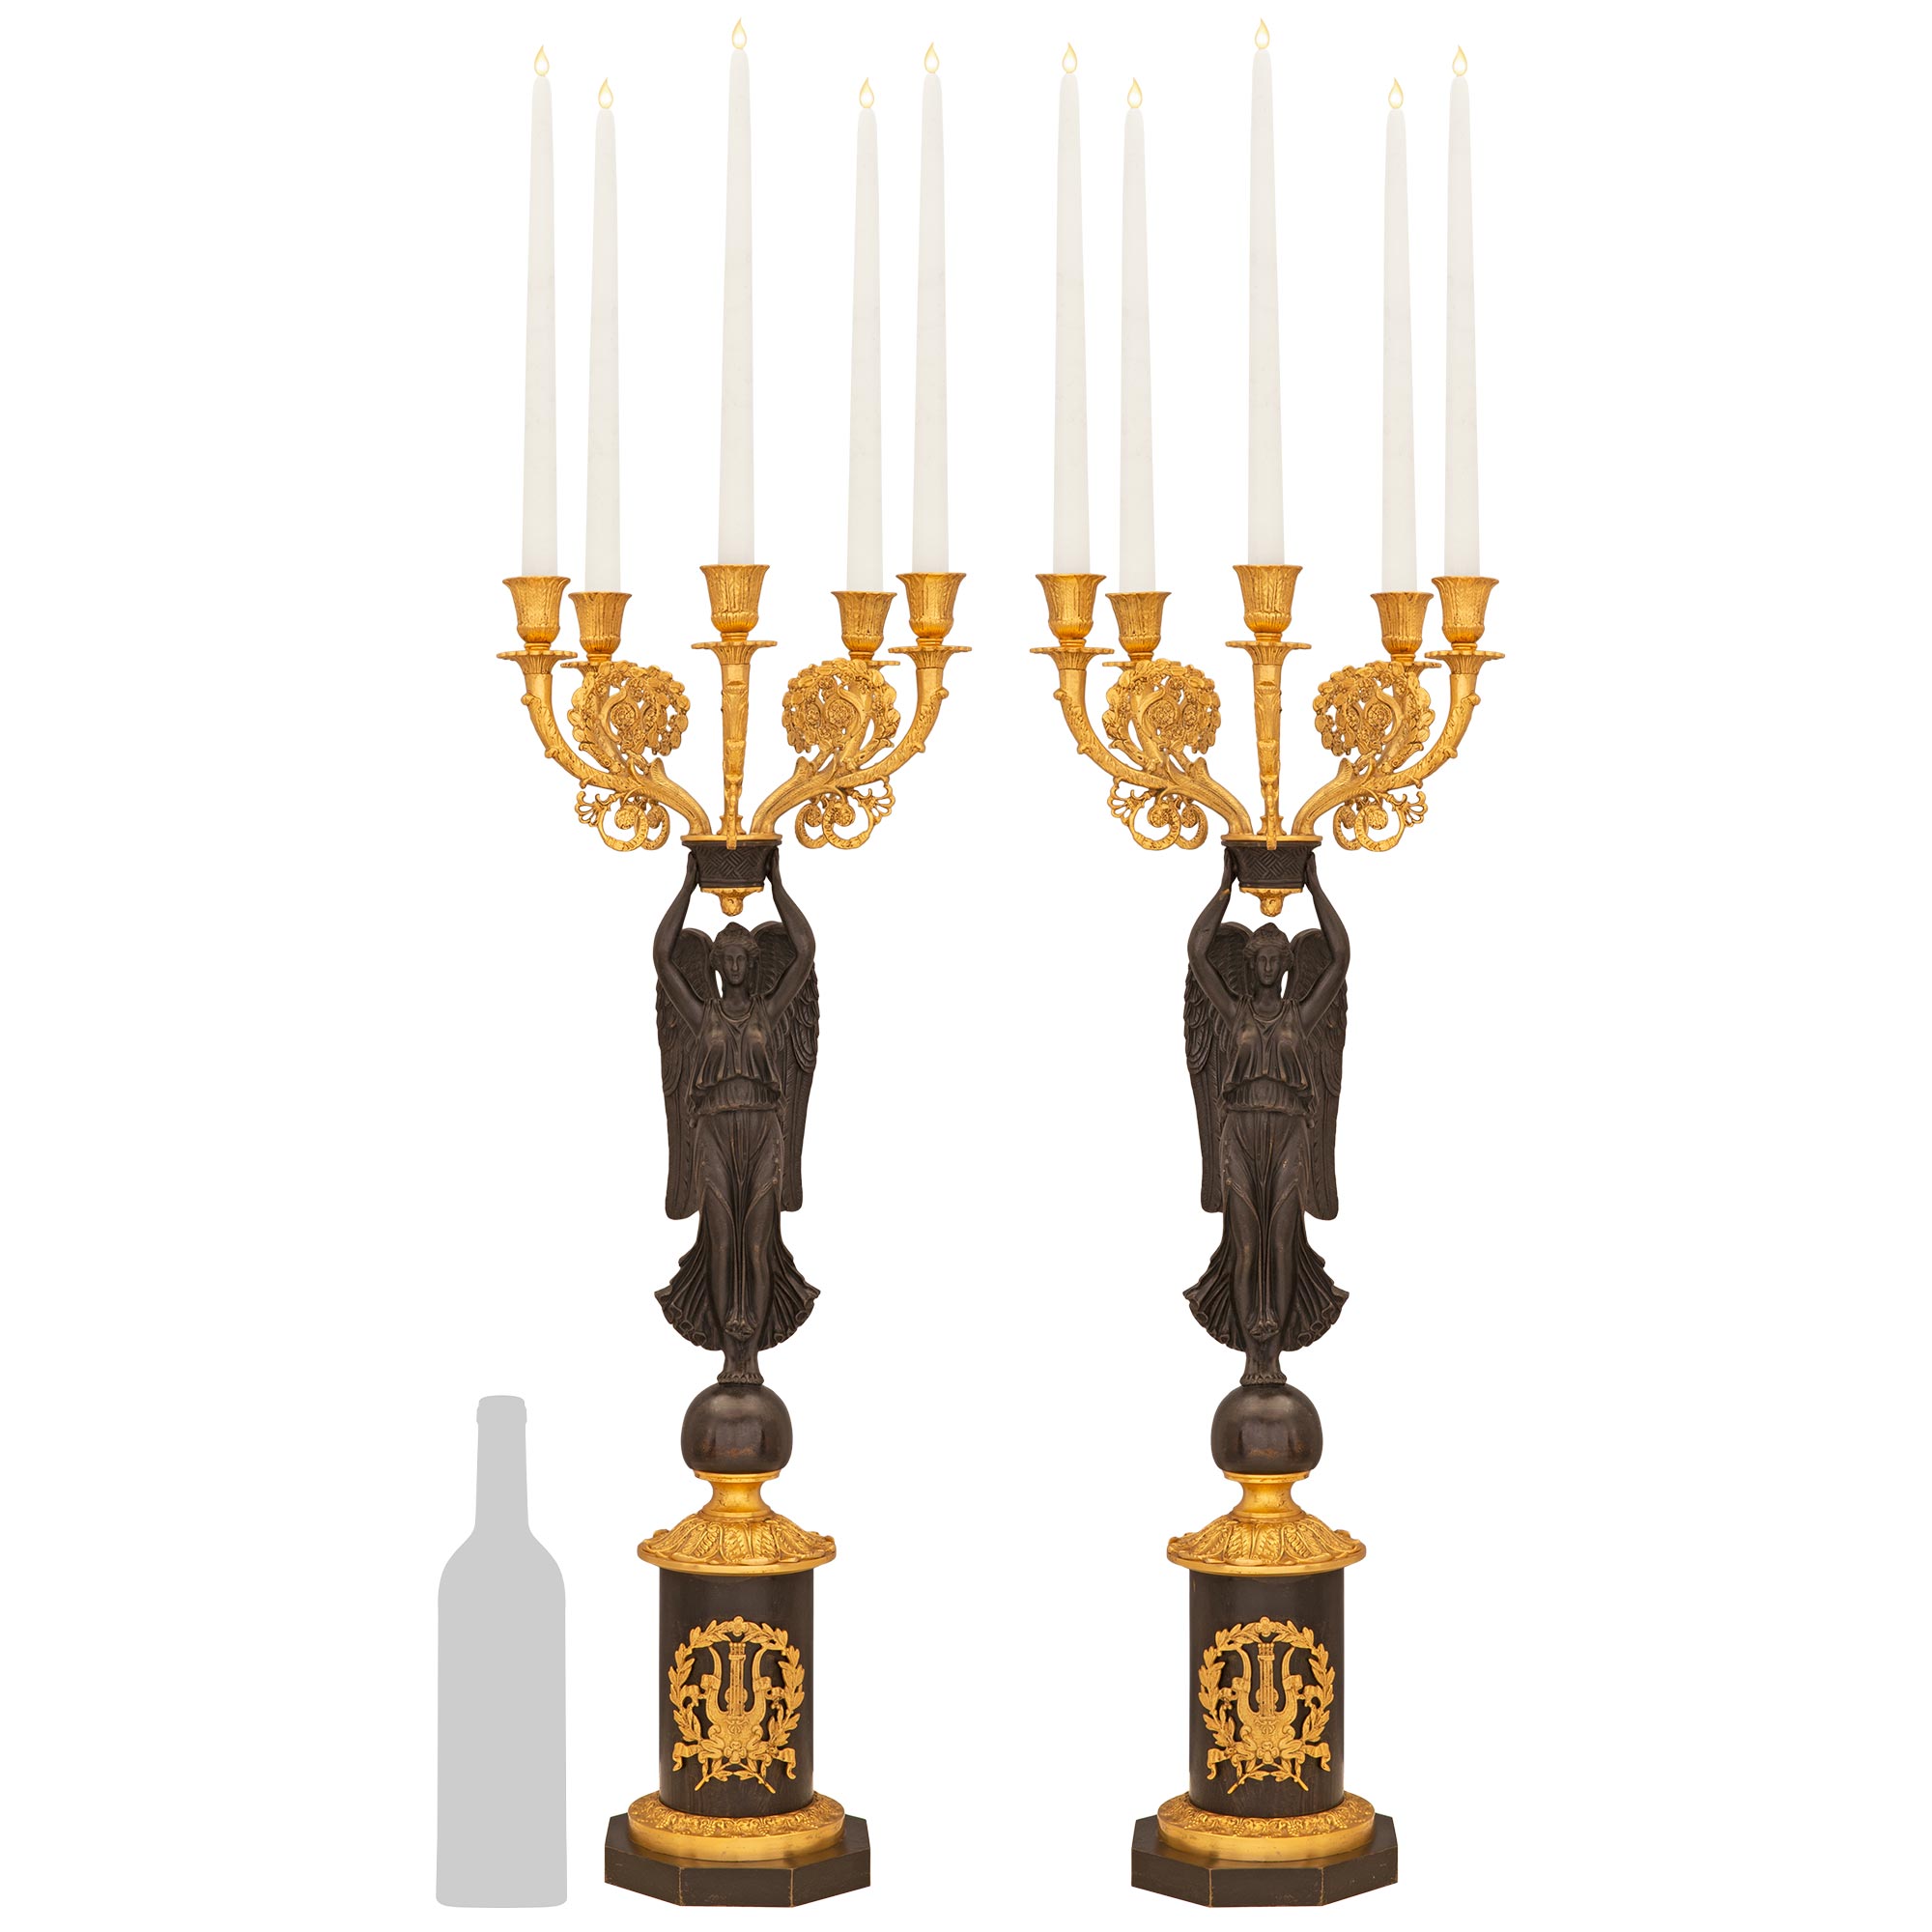 Pair of French 19th Century Neoclassical Style Five-Arm Candelabras